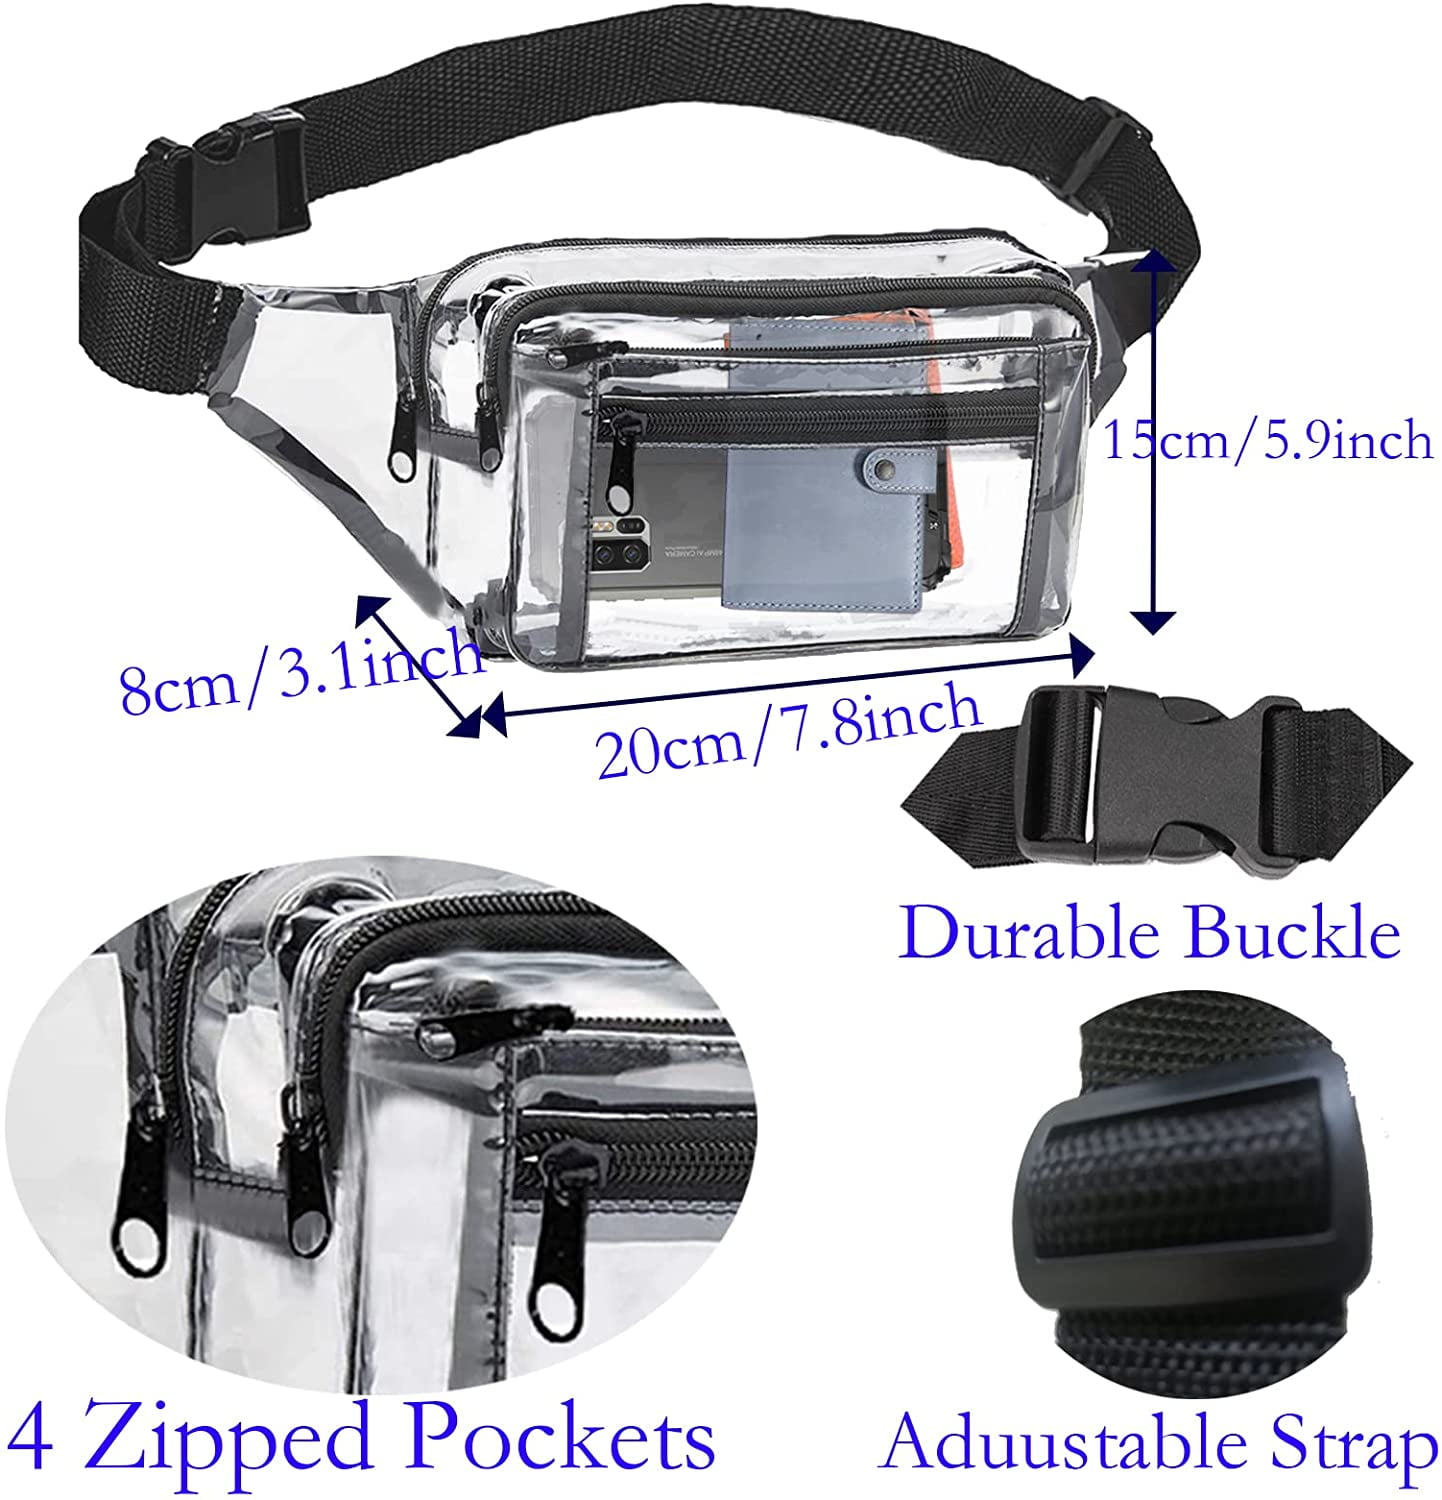 Fanny Packs for Backpacking? An organizational dream! – Garage